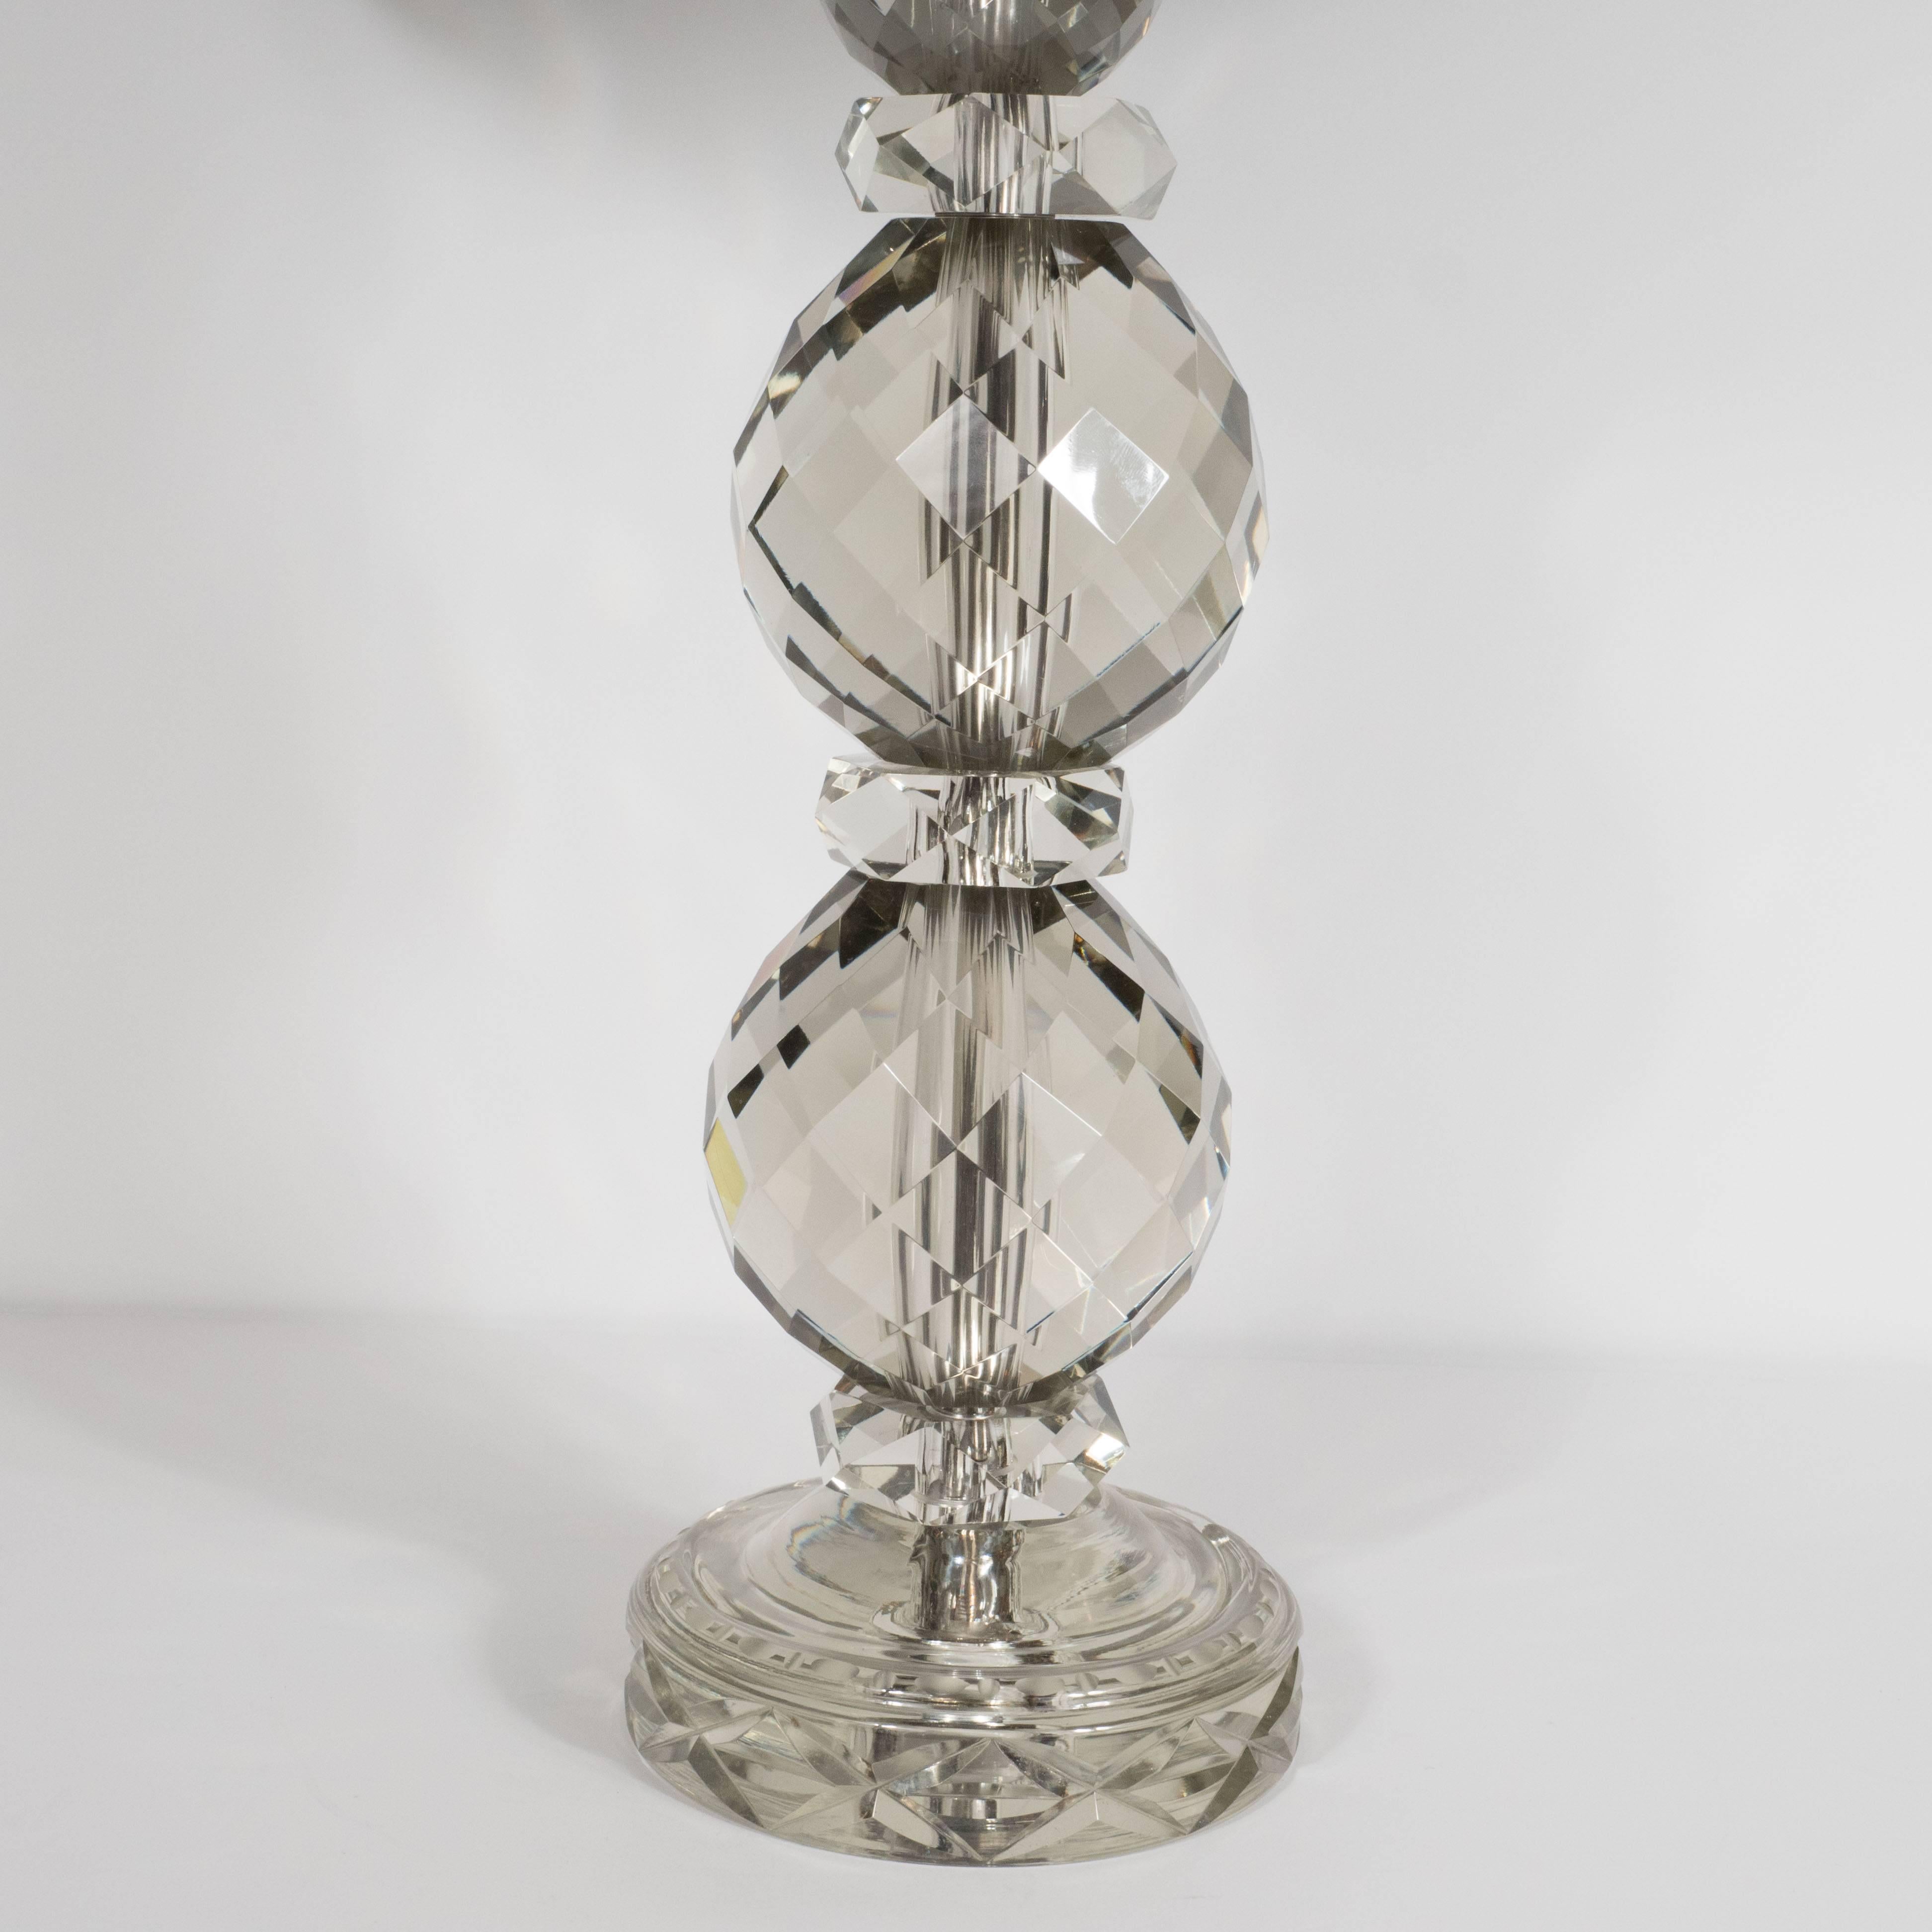 American Pair of Elegant 1940s Hollywood Smoked Cut and Beveled Crystal Table Lamps